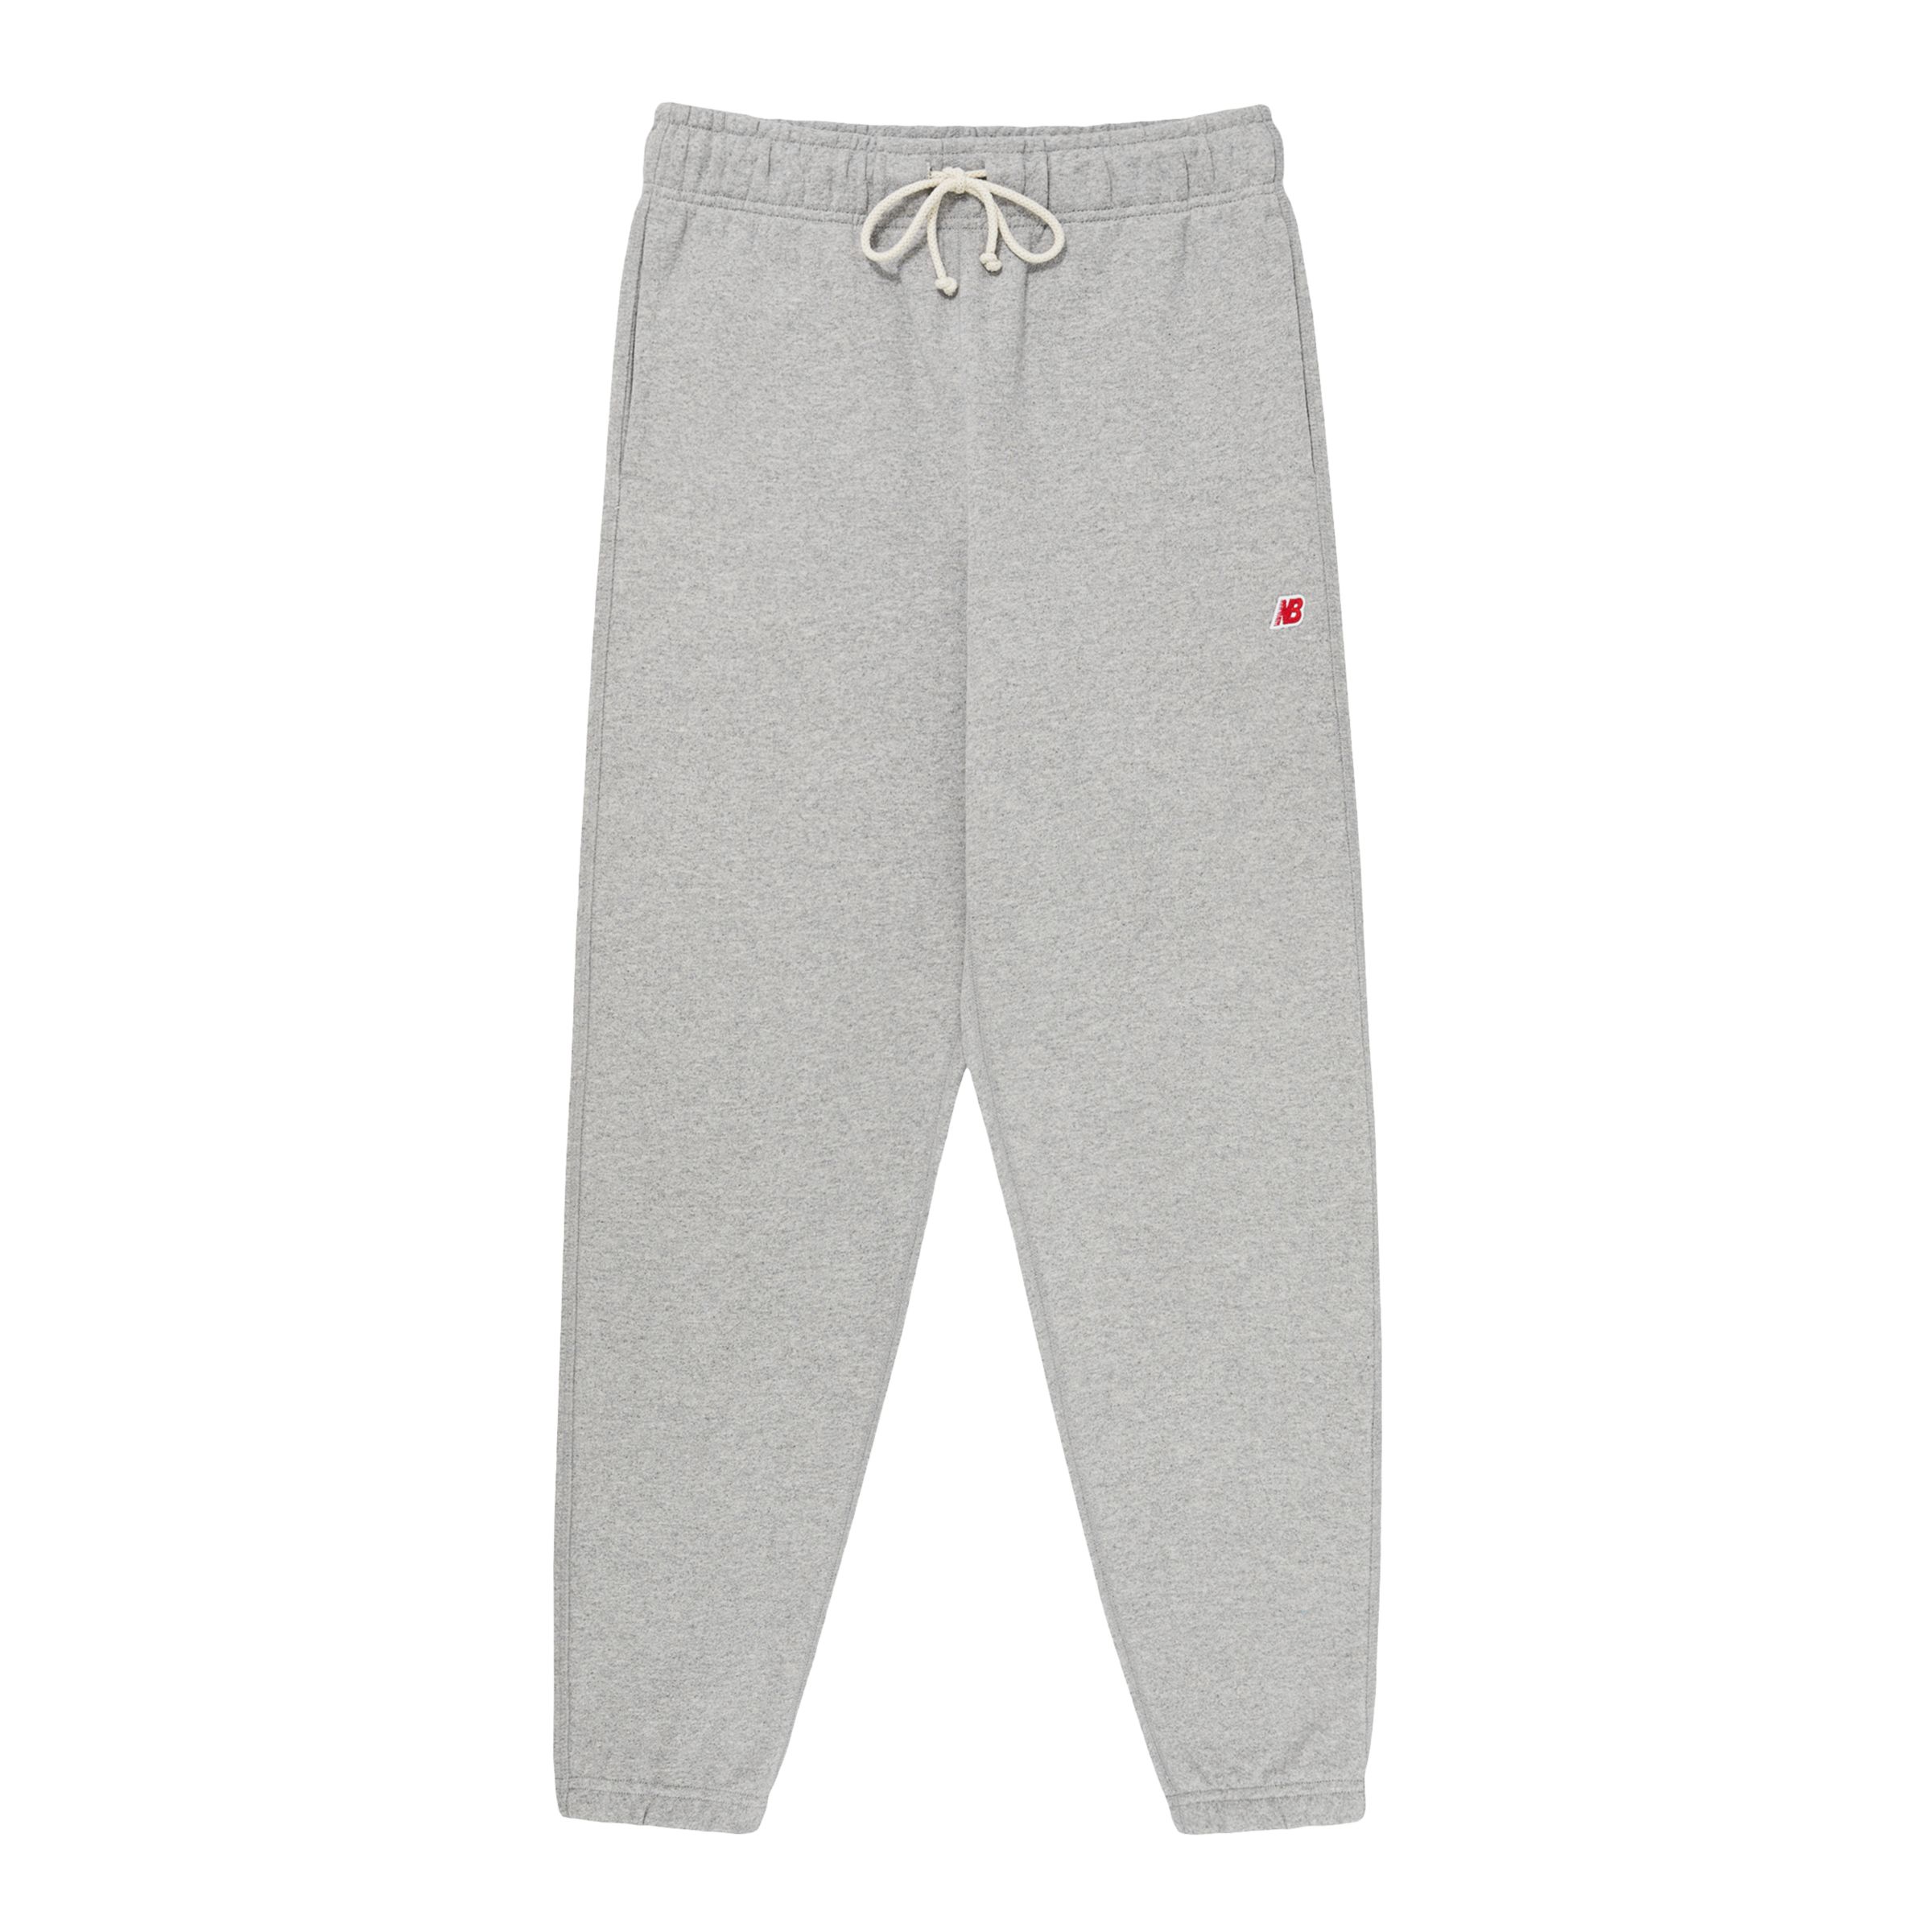 NB MADE in USA Core Sweatpant, , swatch